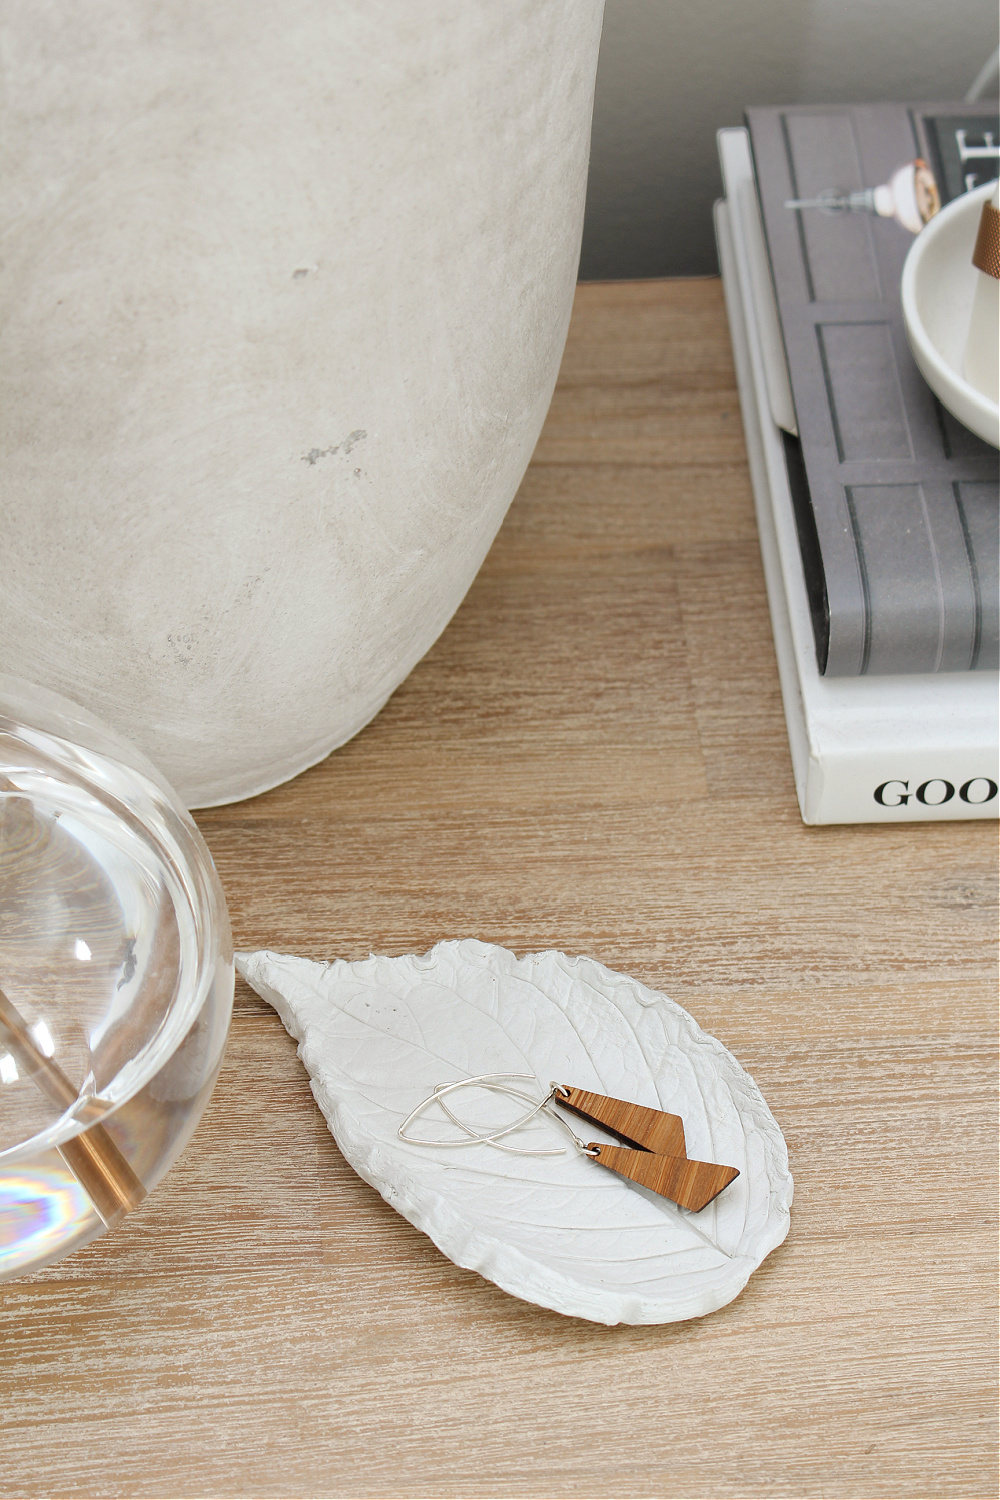 DIY air dry clay tray on a bedside table.